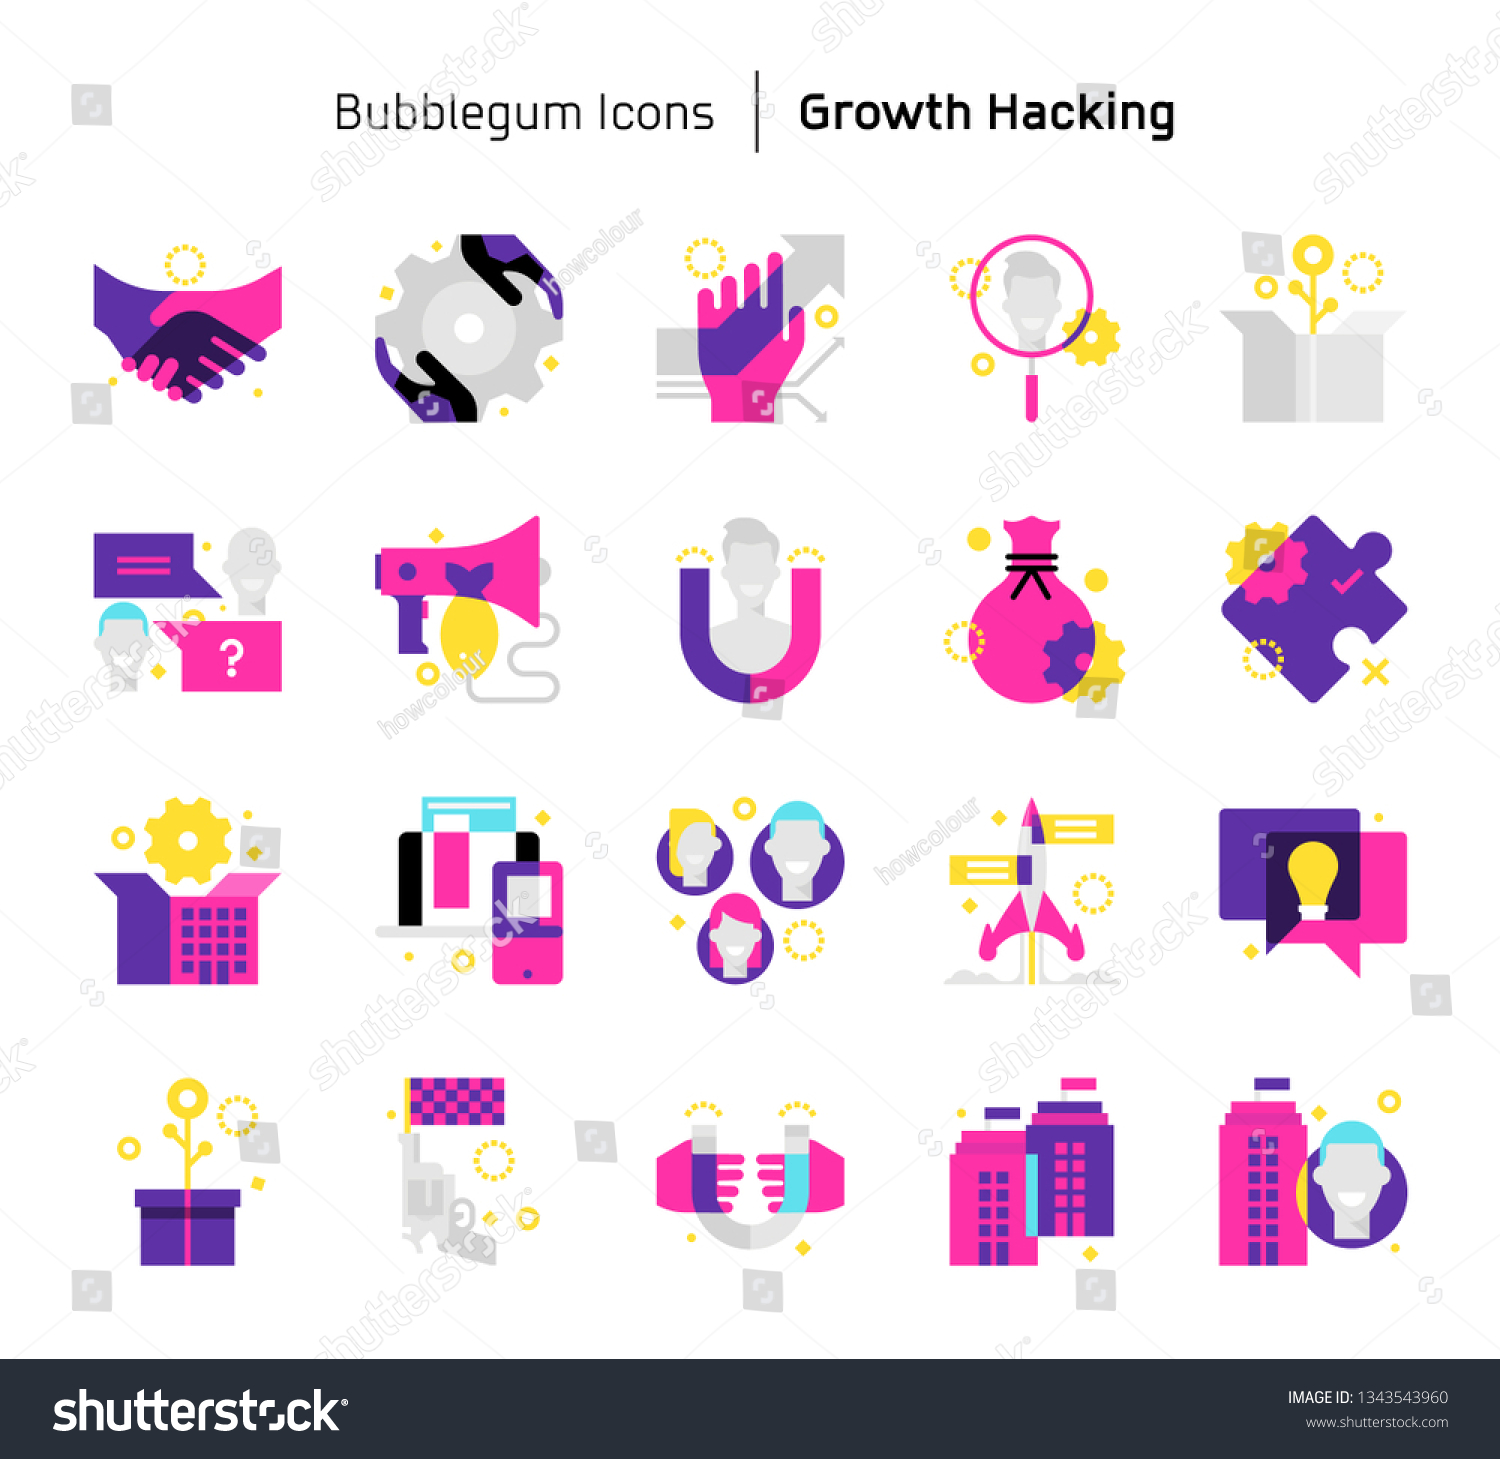 Growth Hacking Bubblegum Icons Illustrations Vector Stock Vector